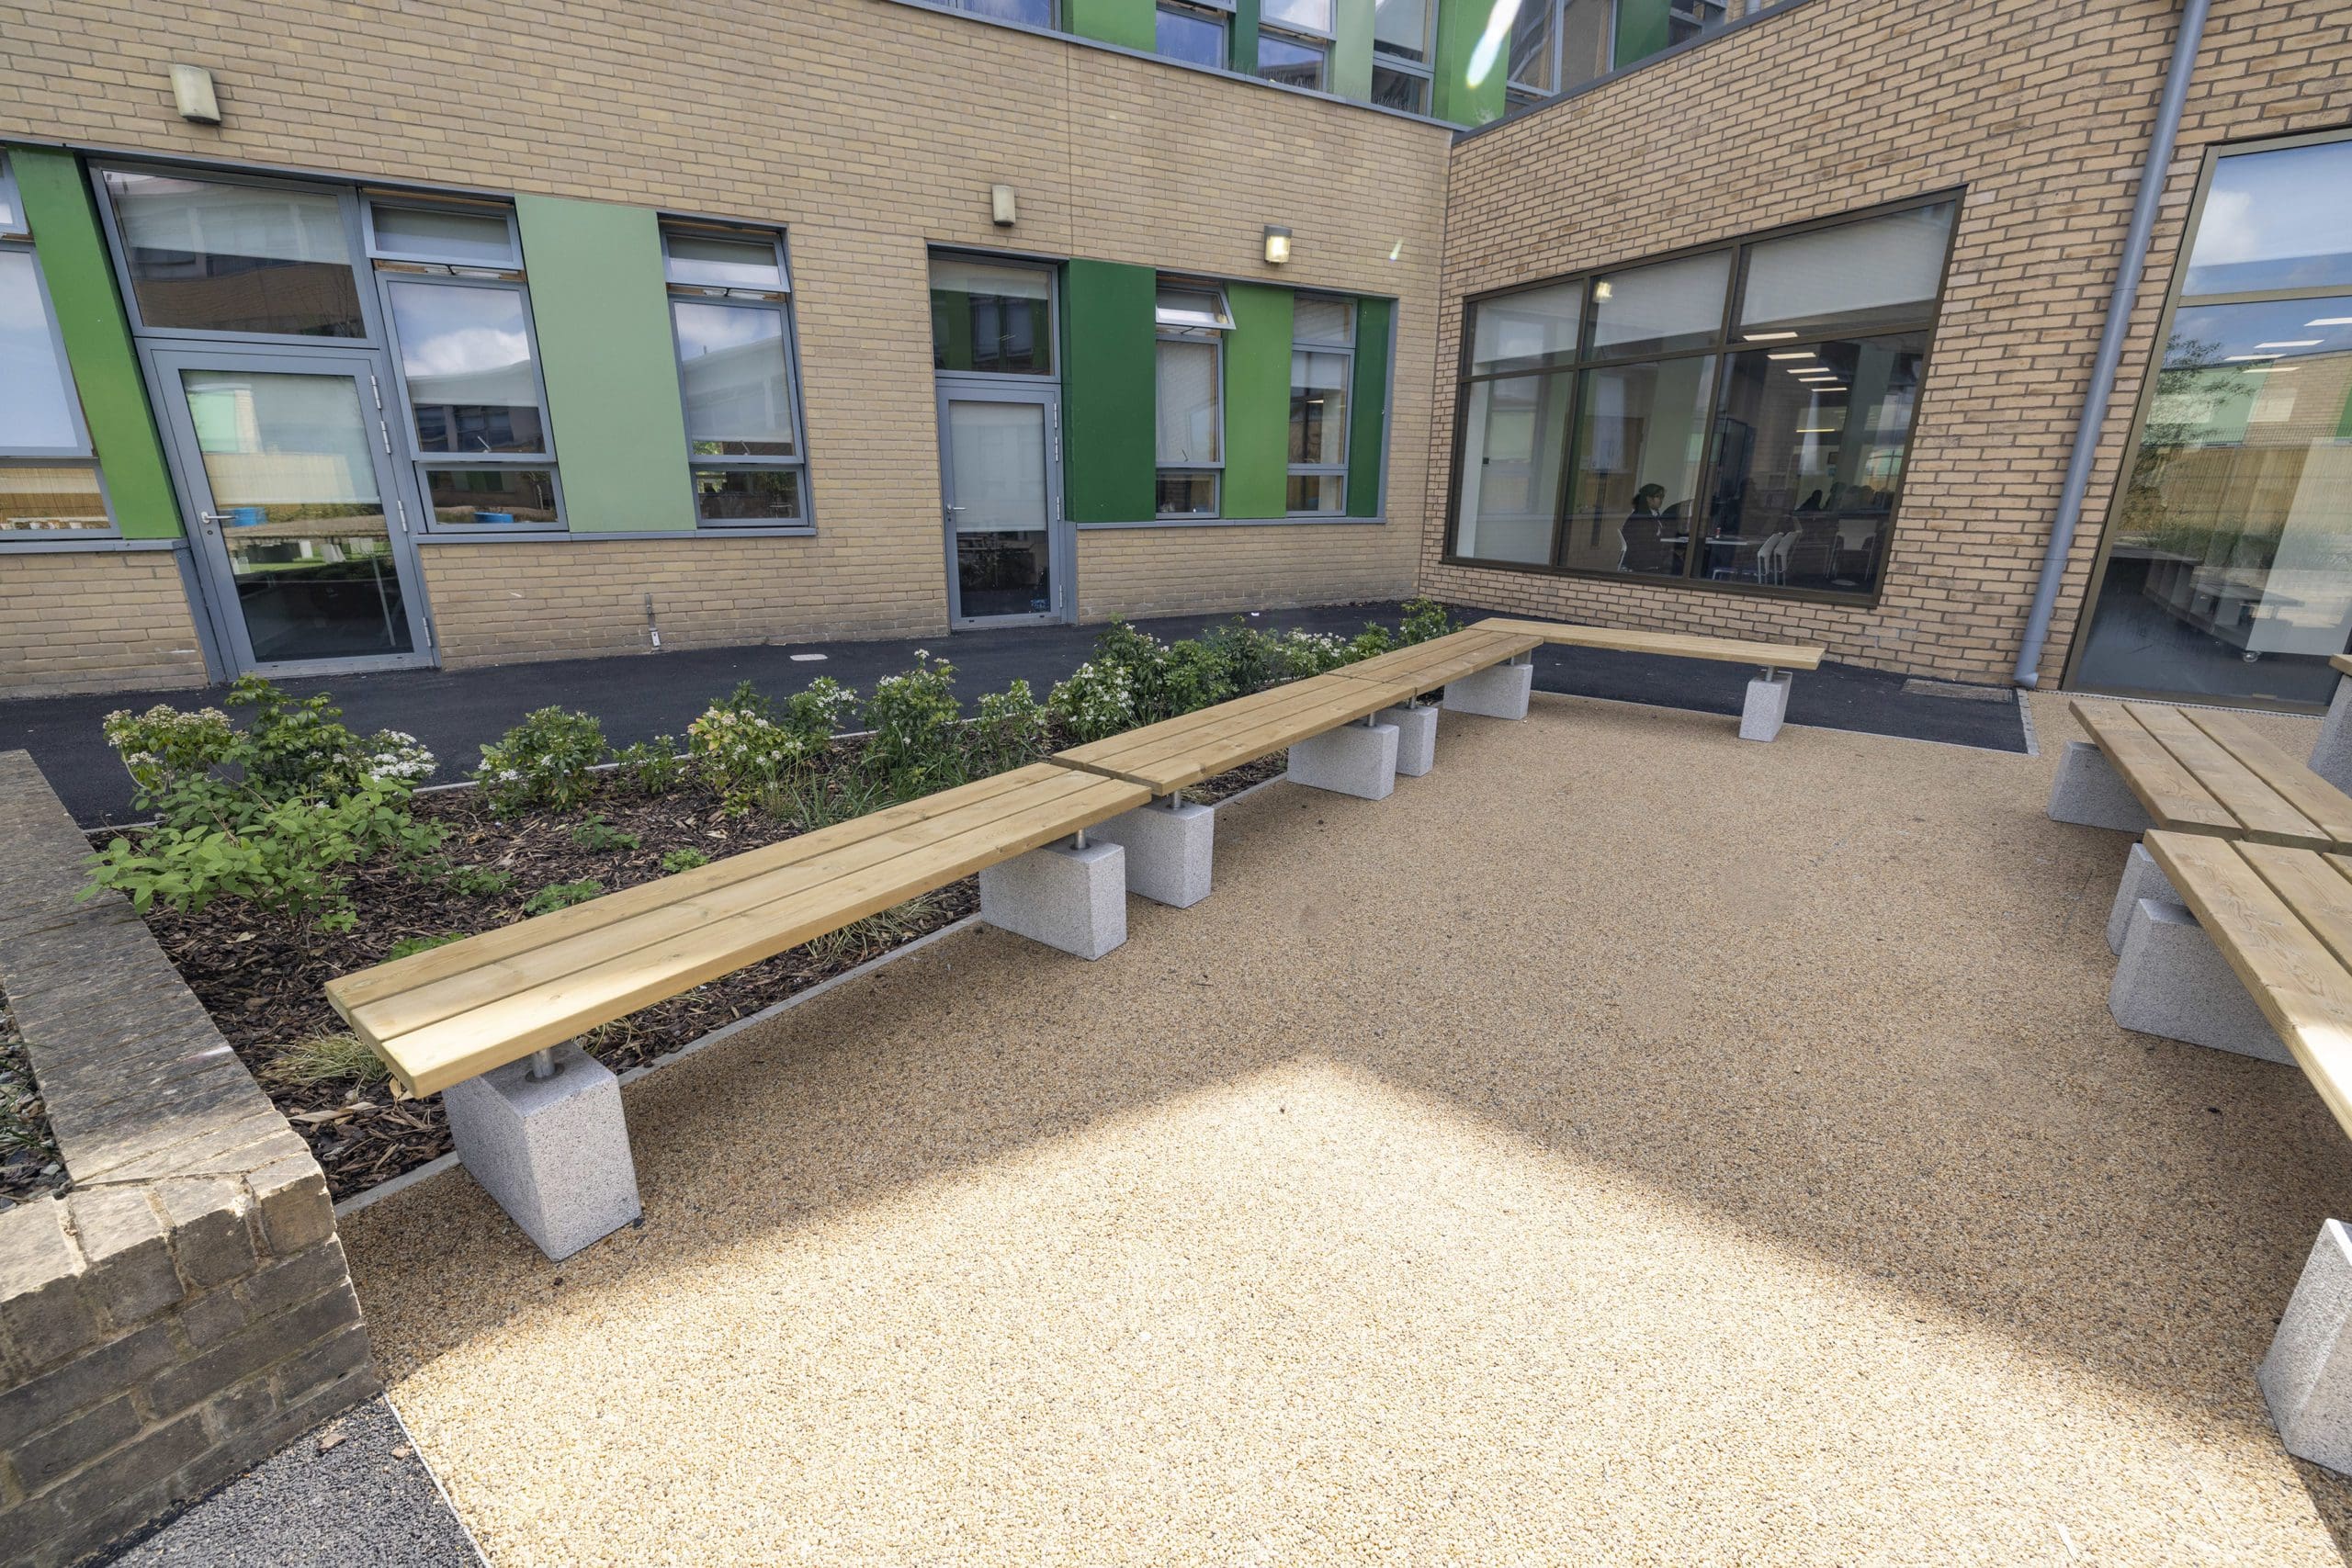 wooden-benches-with-concrete-plinths